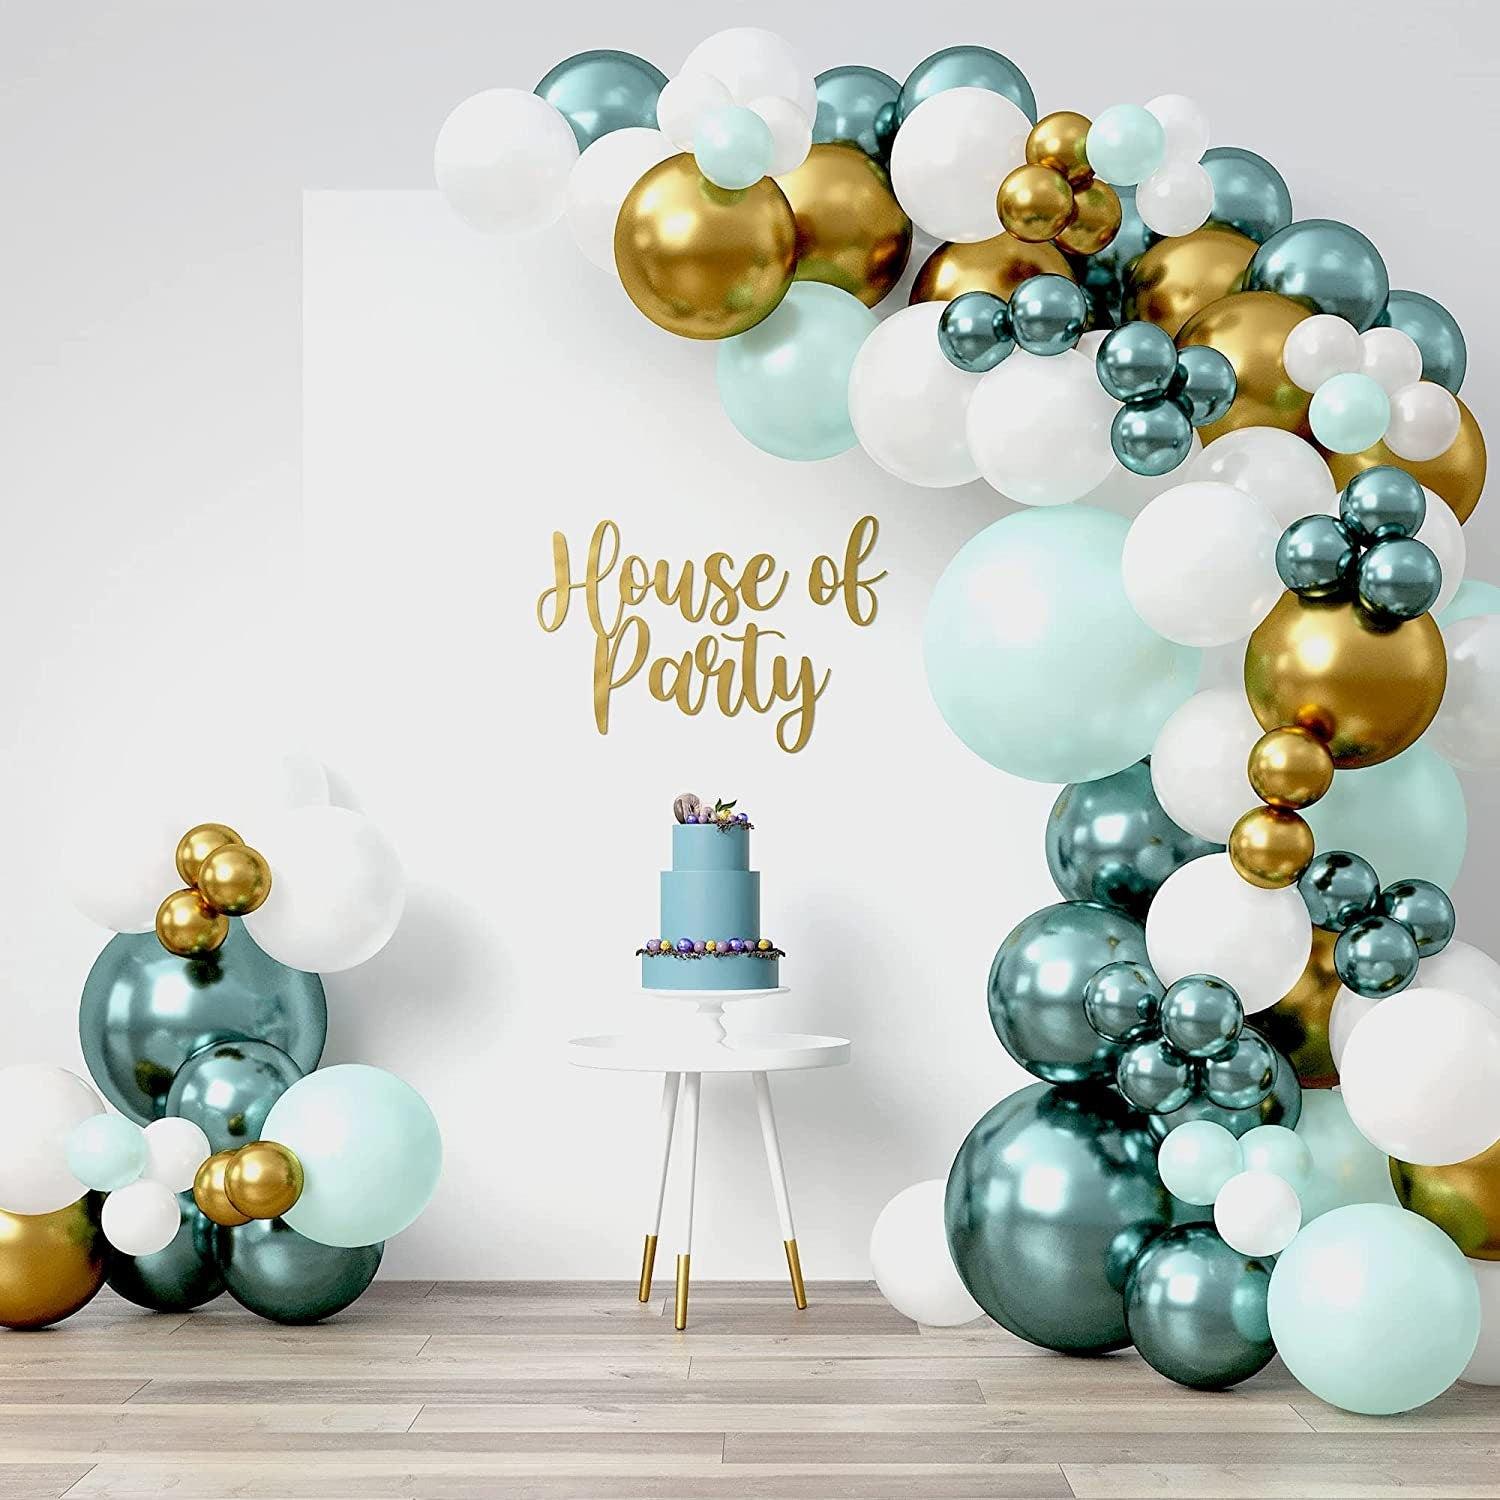 99 Pcs Green Gold Balloon Garland Arch Kit Best Party Decorations for Wedding, Anniversary, Birthday, Engagement, and Bachelorette Party - Lasercutwraps Shop